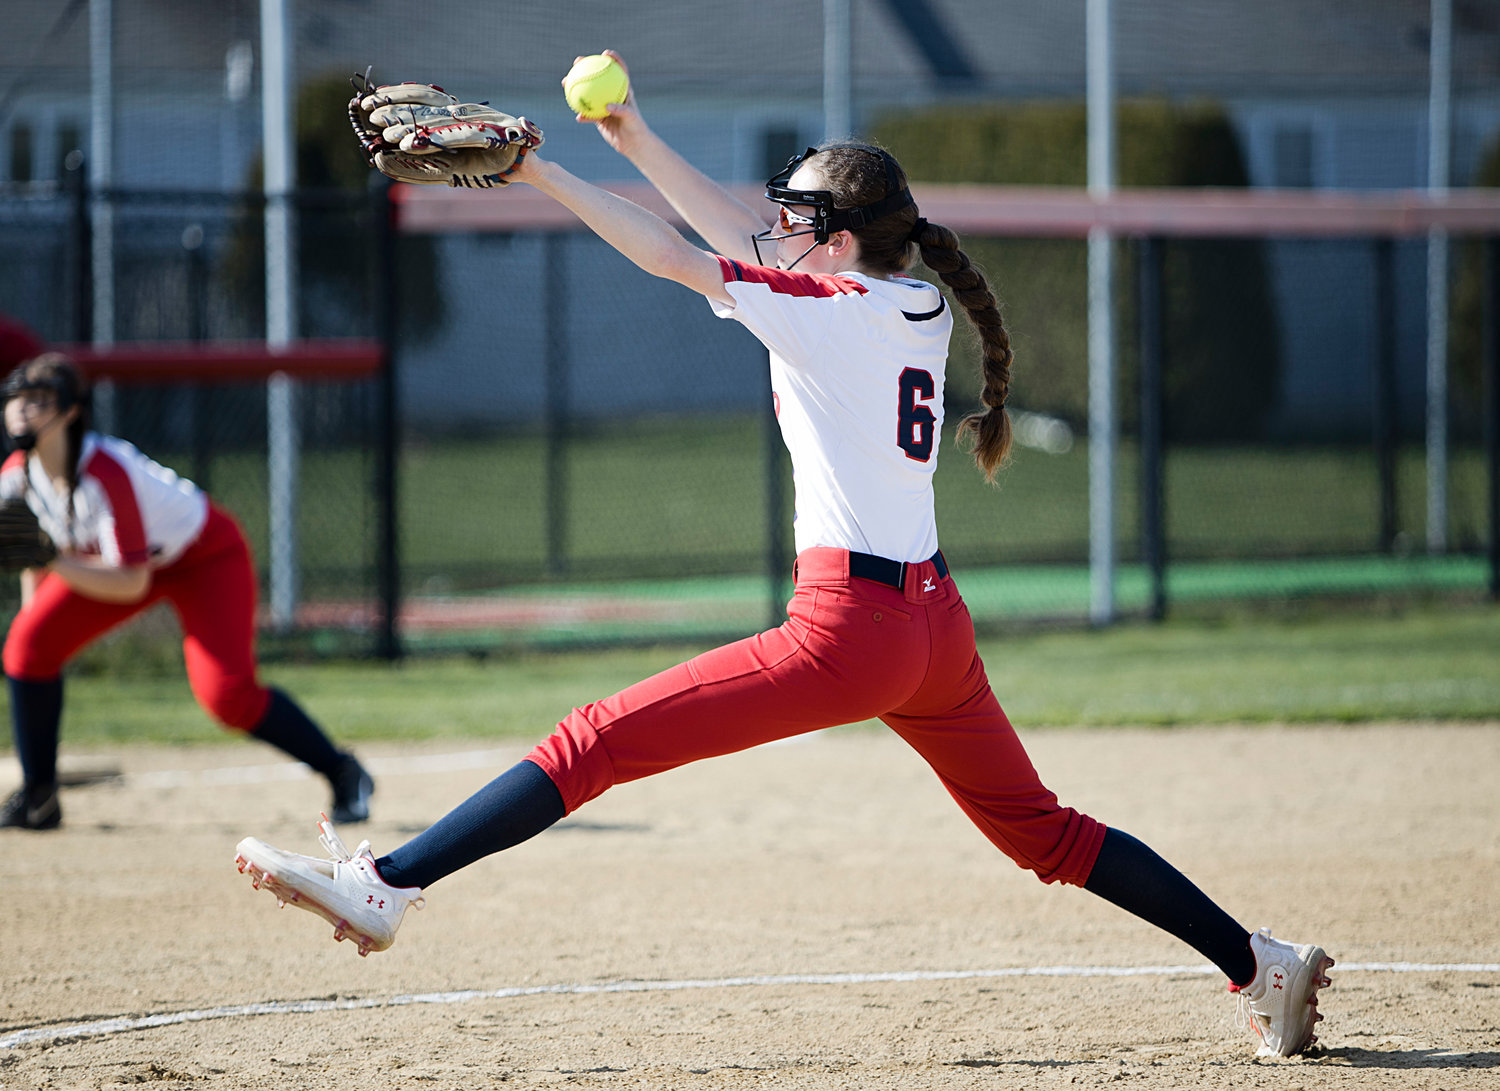 Pitcher Megan Malone fires a pitch to a batter during the first inning.